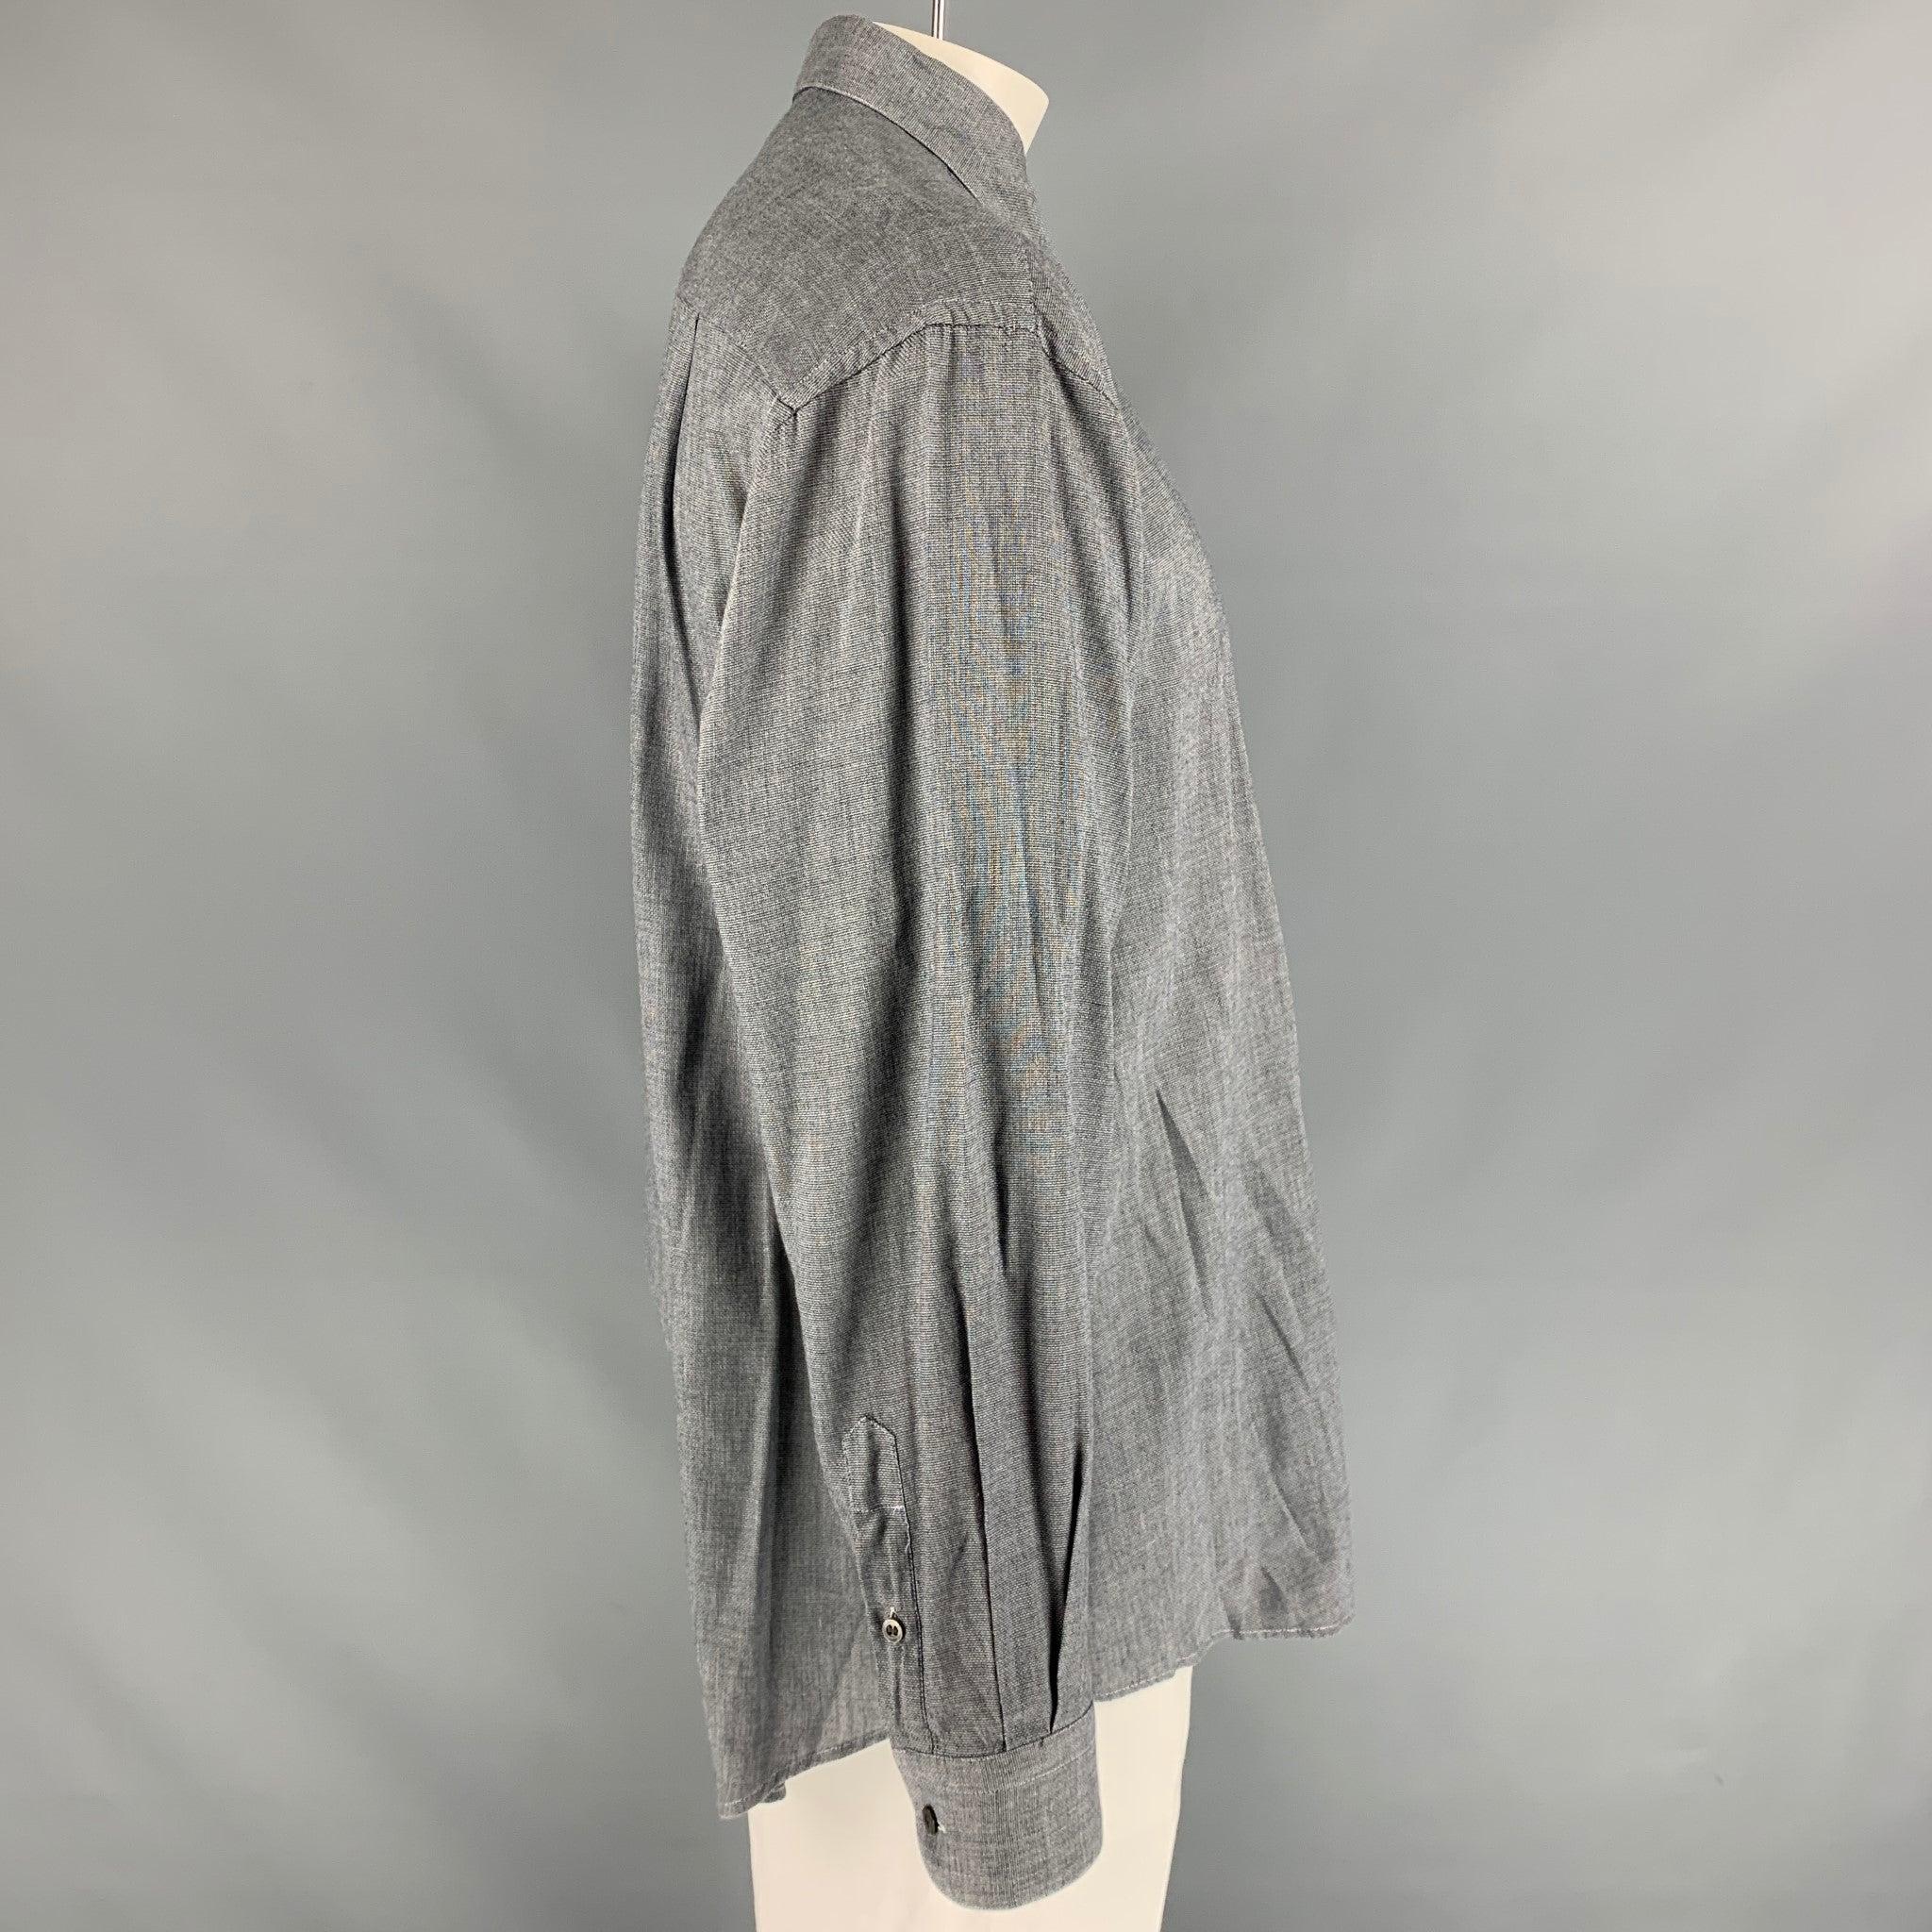 ERMENEGILDO ZEGNA 'SOFT' Long sleeve shirt comes in grey fabric featuring a patch pocket at left front panel, straight collar, one button round cuff, and button up closure. Very Good Pre-Owned Condition. 

Marked:   41/16 

Measurements: 
